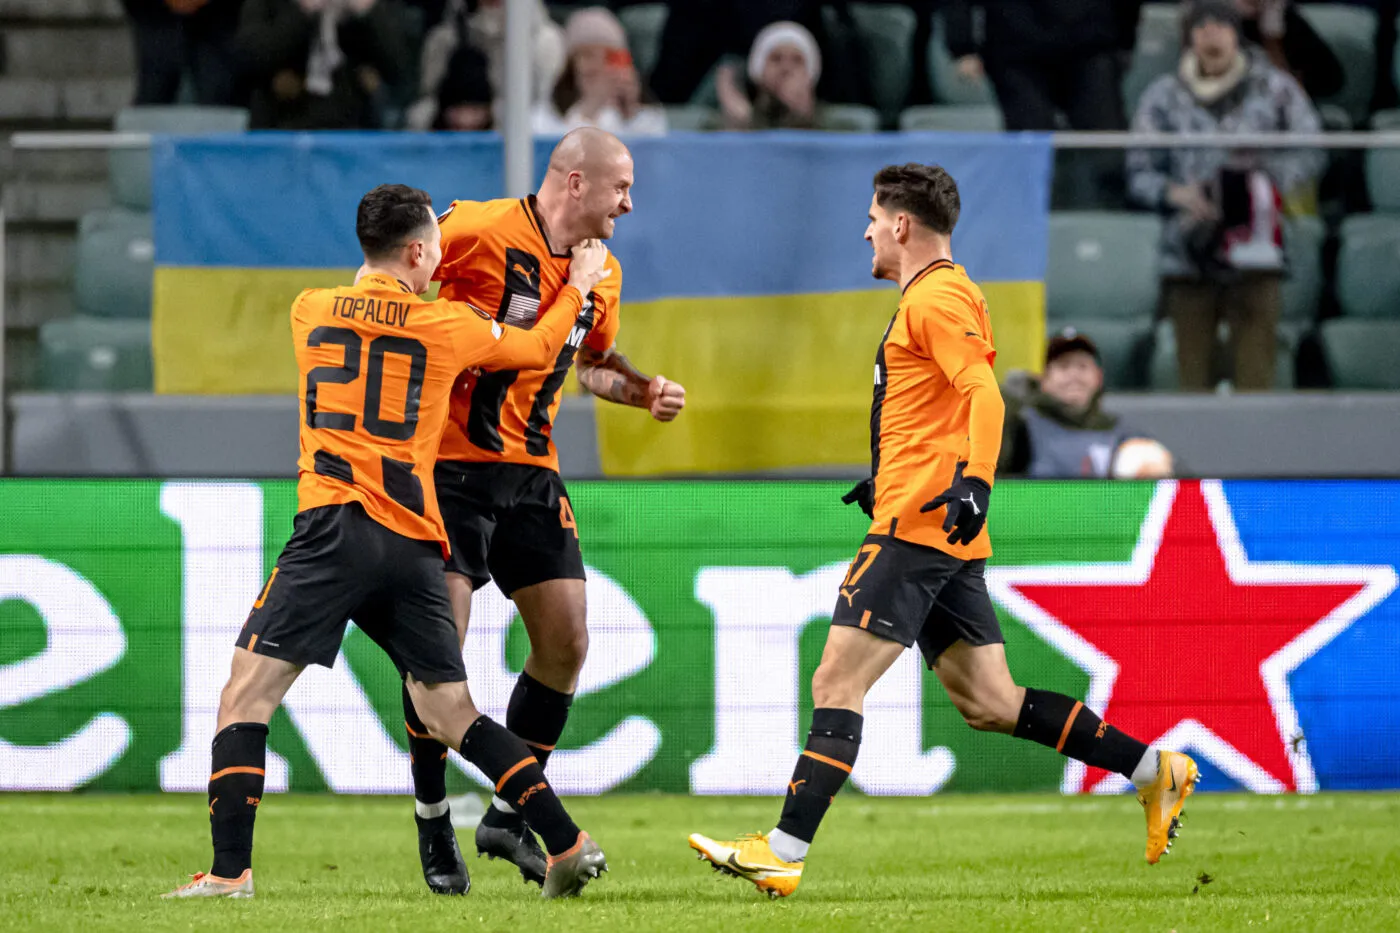 Goal of Shakhtar player Yaraslov Rakitskyi  during the UEFA Europa League match between Chakhtar Donetsk and Feyenoord Rotterdam at Pepsi Arena on March 9, 2023 in Warsaw, Poland. (Photo by ProShots/Icon Sport)